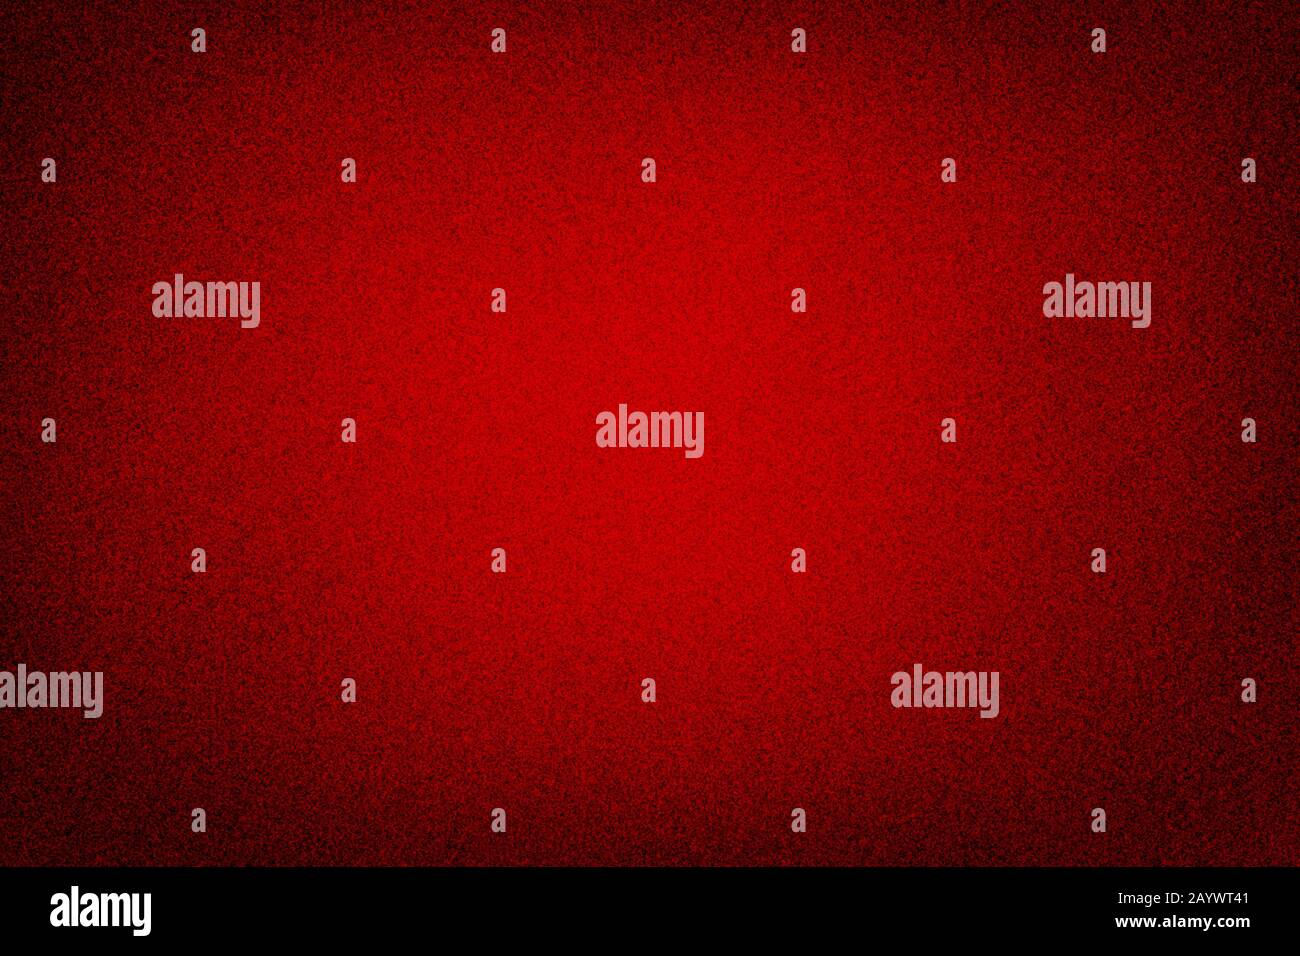 Abstract red background with vignetting around the edges. Stock Photo